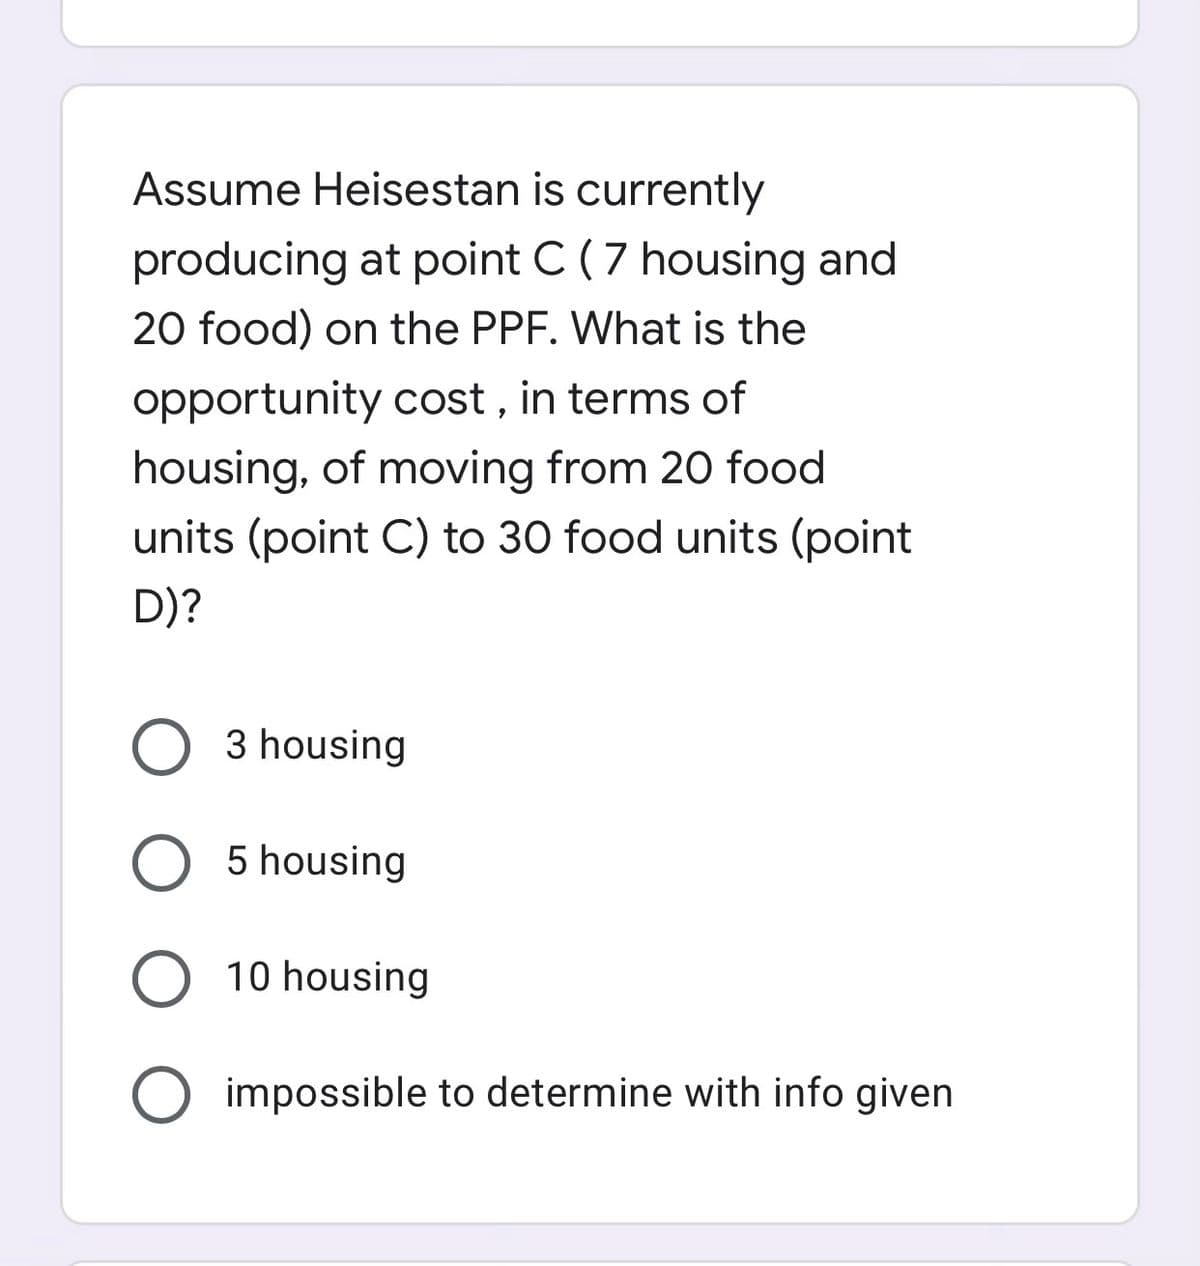 Assume Heisestan is currently
producing at point C (7 housing and
20 food) on the PPF. What is the
opportunity cost , in terms of
housing, of moving from 20 food
units (point C) to 30 food units (point
D)?
3 housing
O 5 housing
O 10 housing
O impossible to determine with info given
